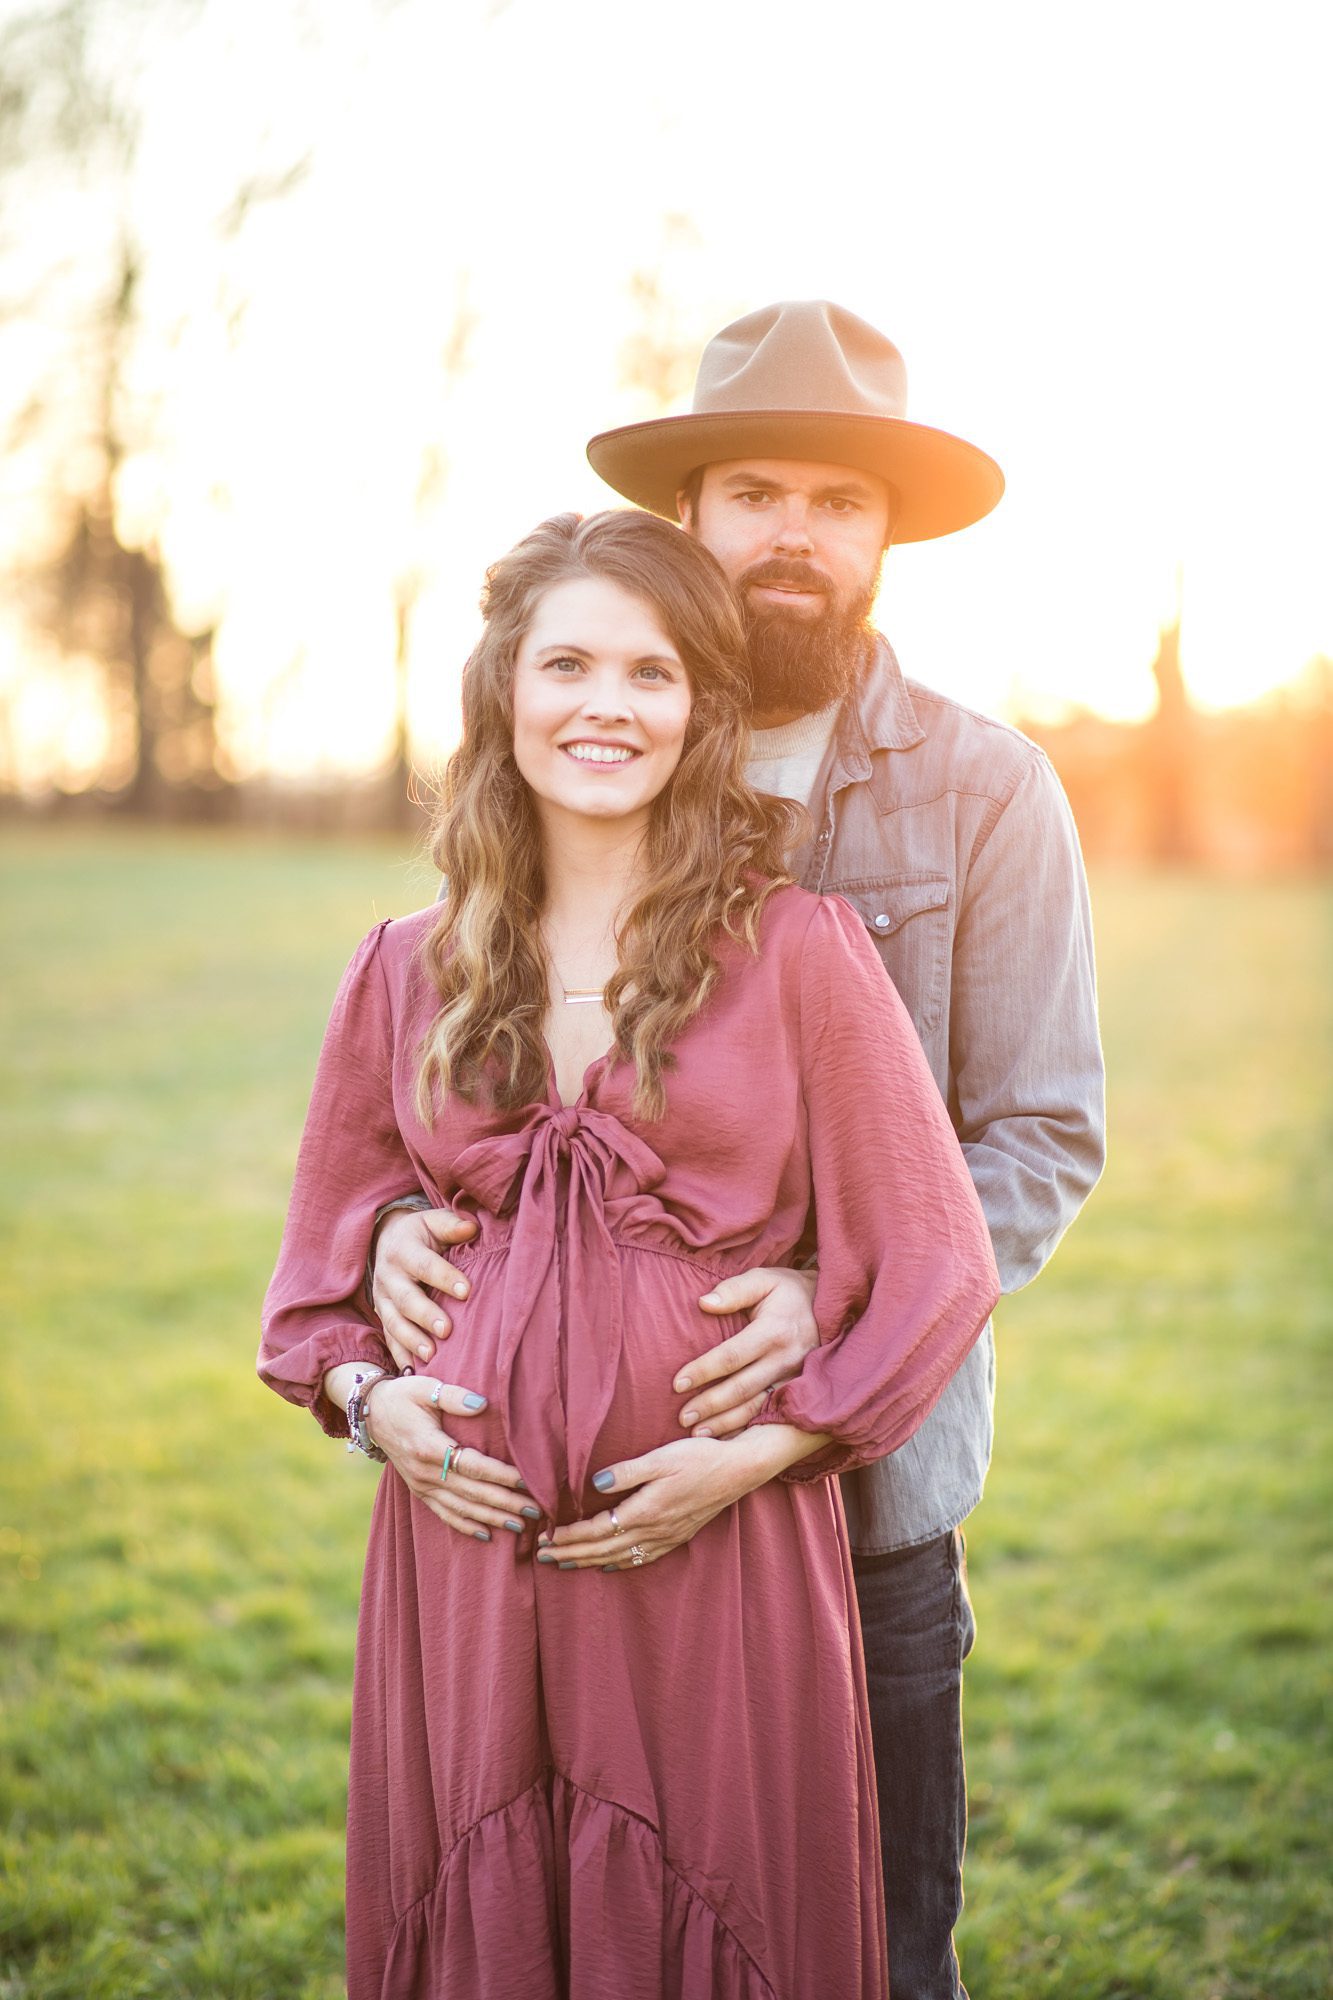 Pretty couple photo maternity session in a field at sunset 